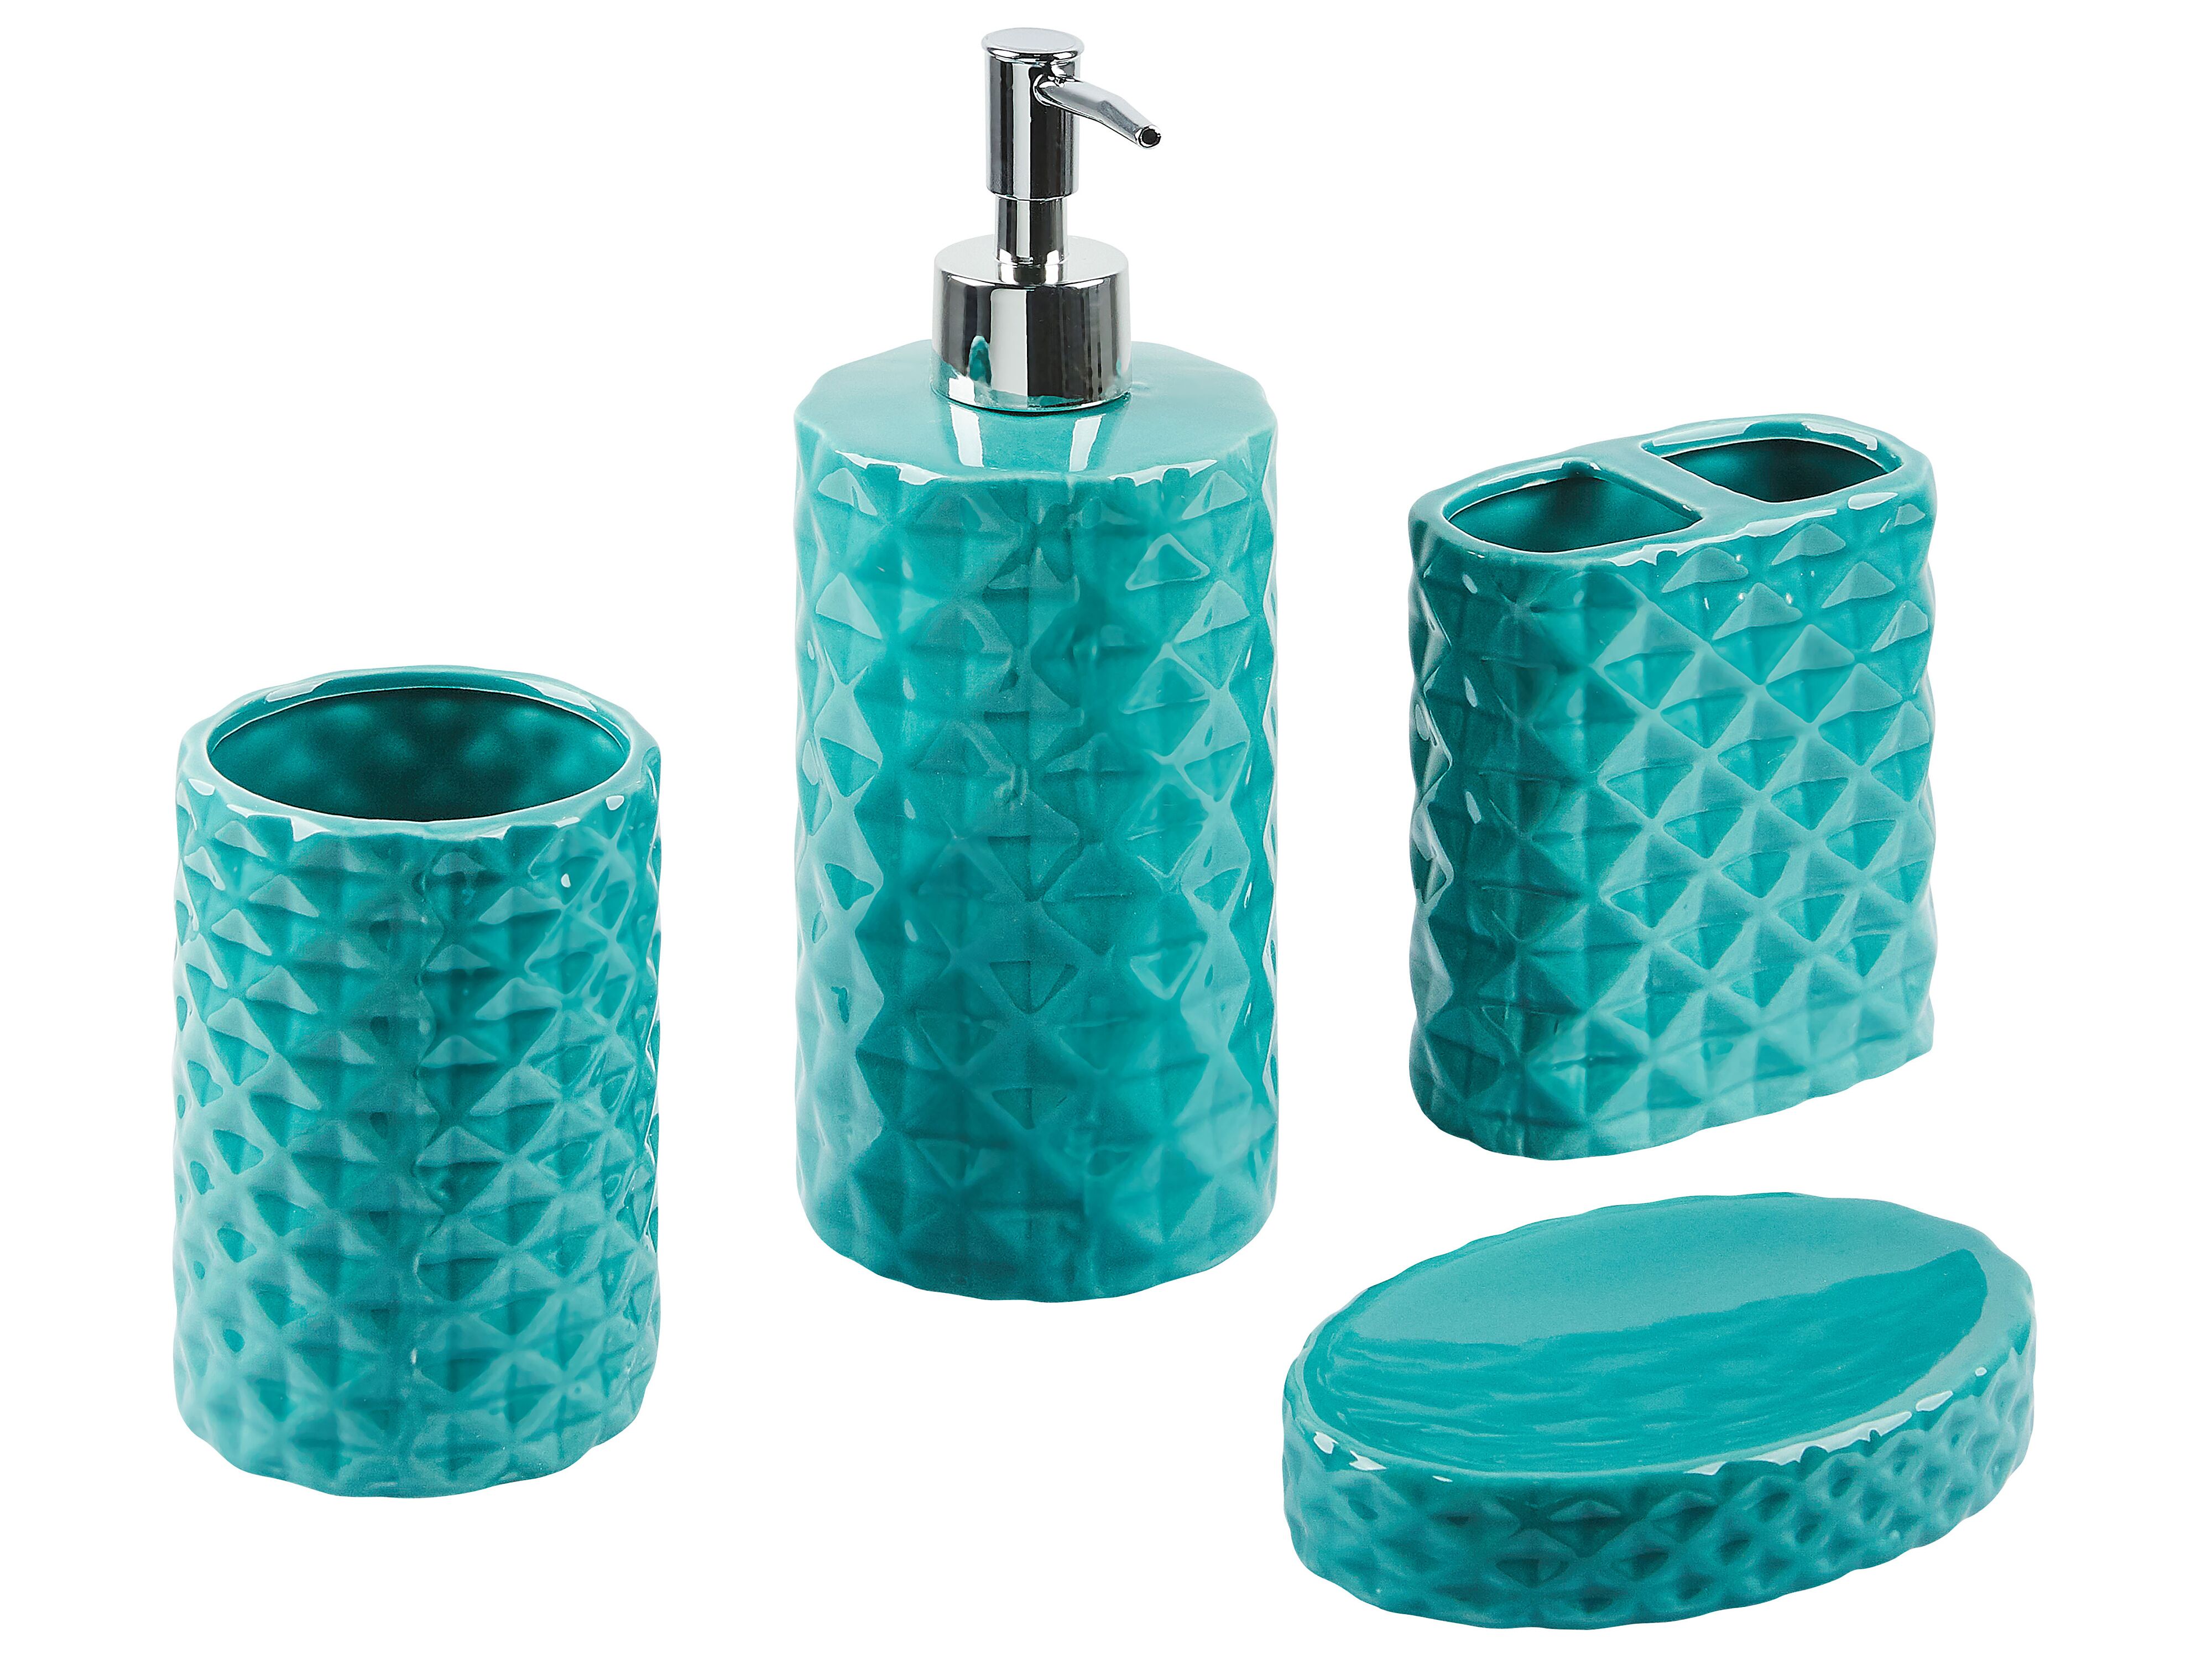 Ceramic 4-Piece Bathroom Accessories Set Turquoise GUATIRE - Furniture,  lamps & accessories up to 70% off